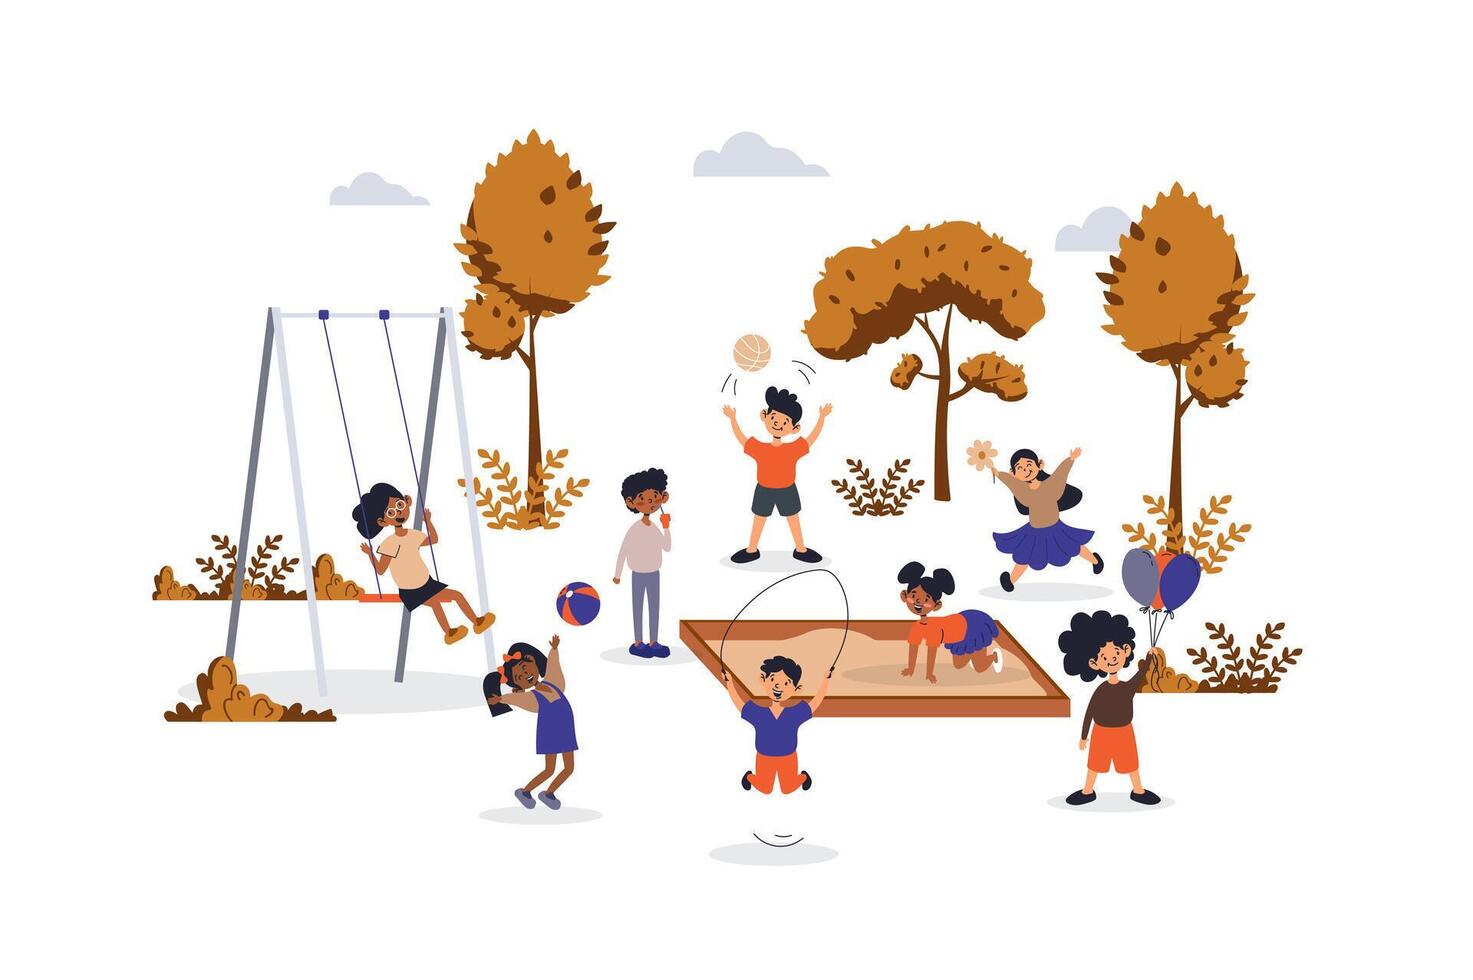 Children playing on playground concept with character scene for web. Boys and girls play in sandbox, swing, jumping rope. People situation in flat design. Vector illustration for marketing material.